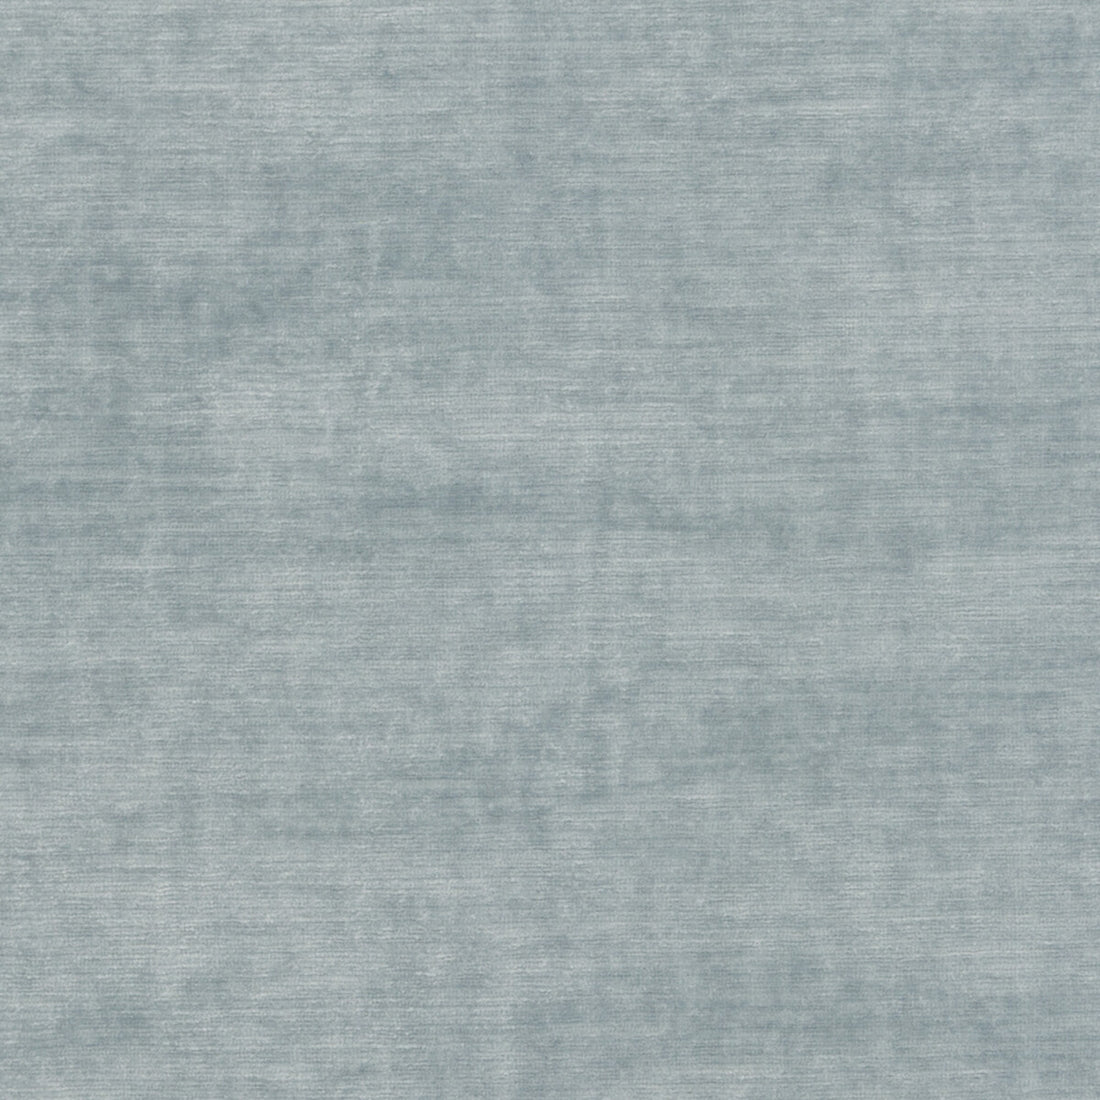 Meridian Velvet fabric in soft blue color - pattern ED85292.605.0 - by Threads in the Meridian collection